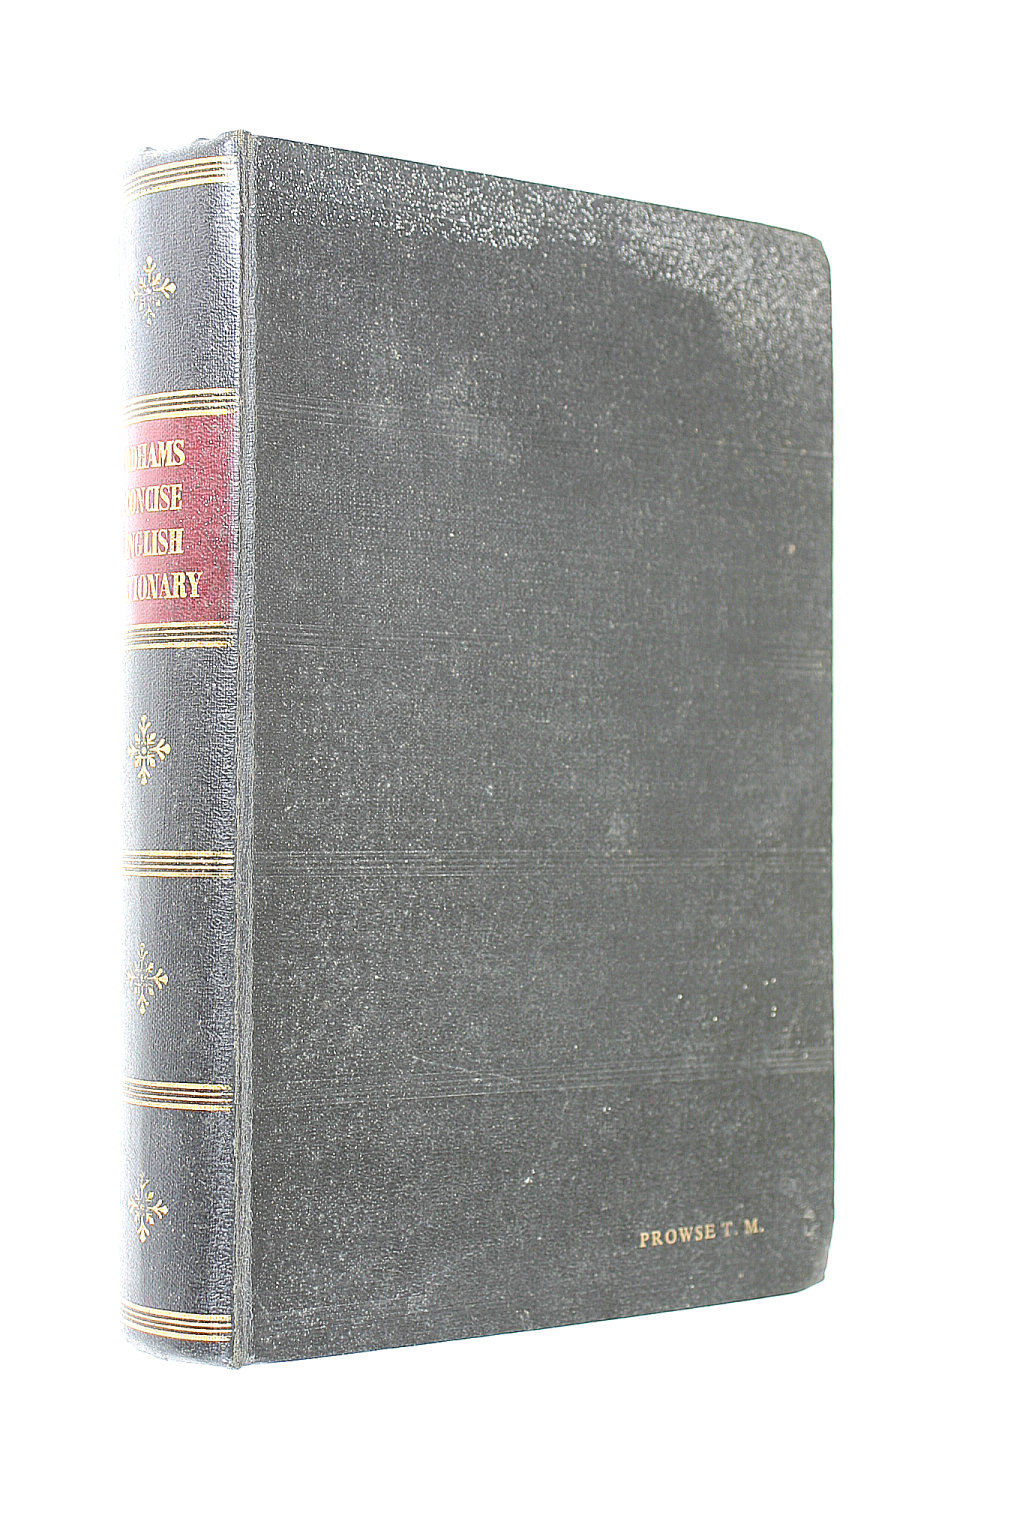 A M ALDEN - Odhams Concise English Dictionary: A Compact Guide To The Meaning, Pronunciation And Use Of Words And Phrases